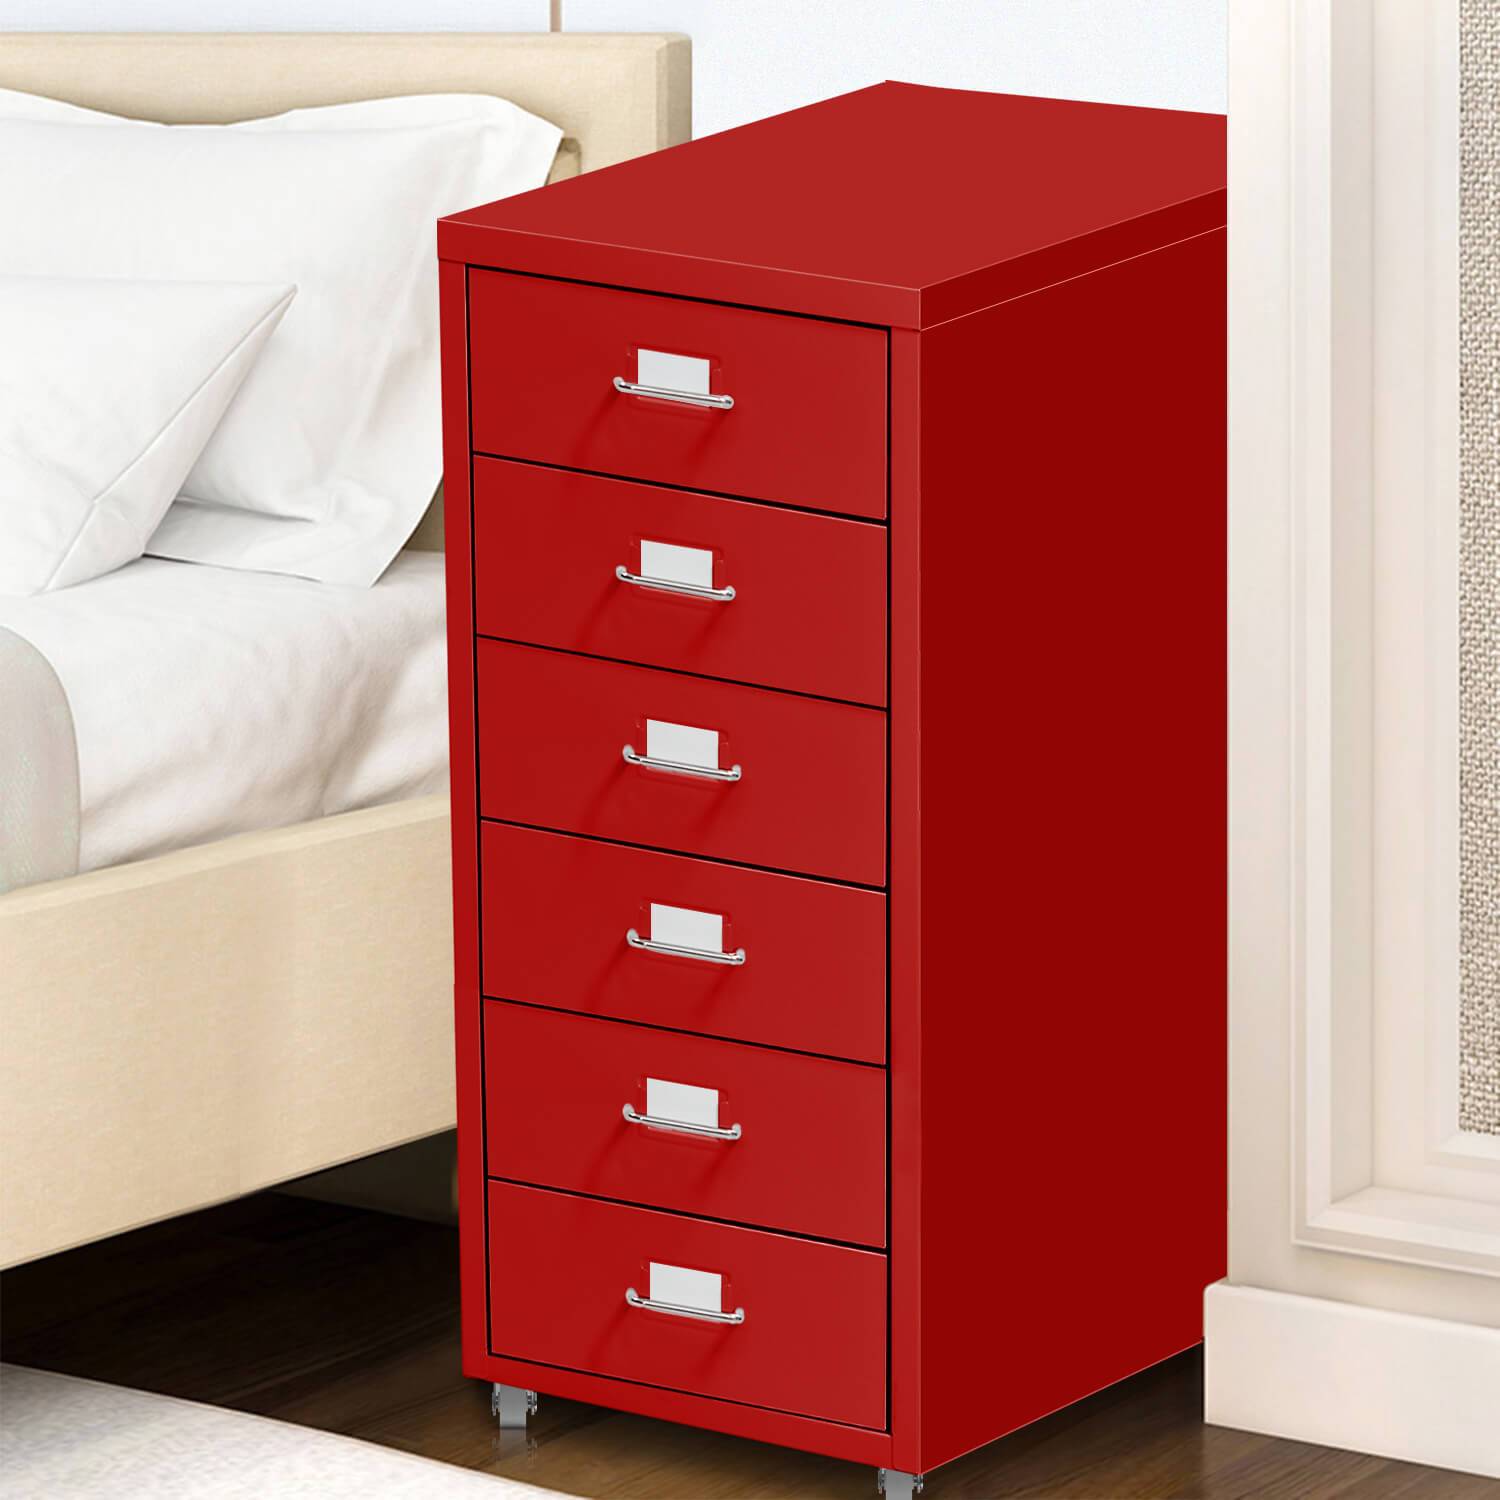 office & study 6 Tiers Steel Orgainer Metal File Cabinet With Drawers Office Furniture Red